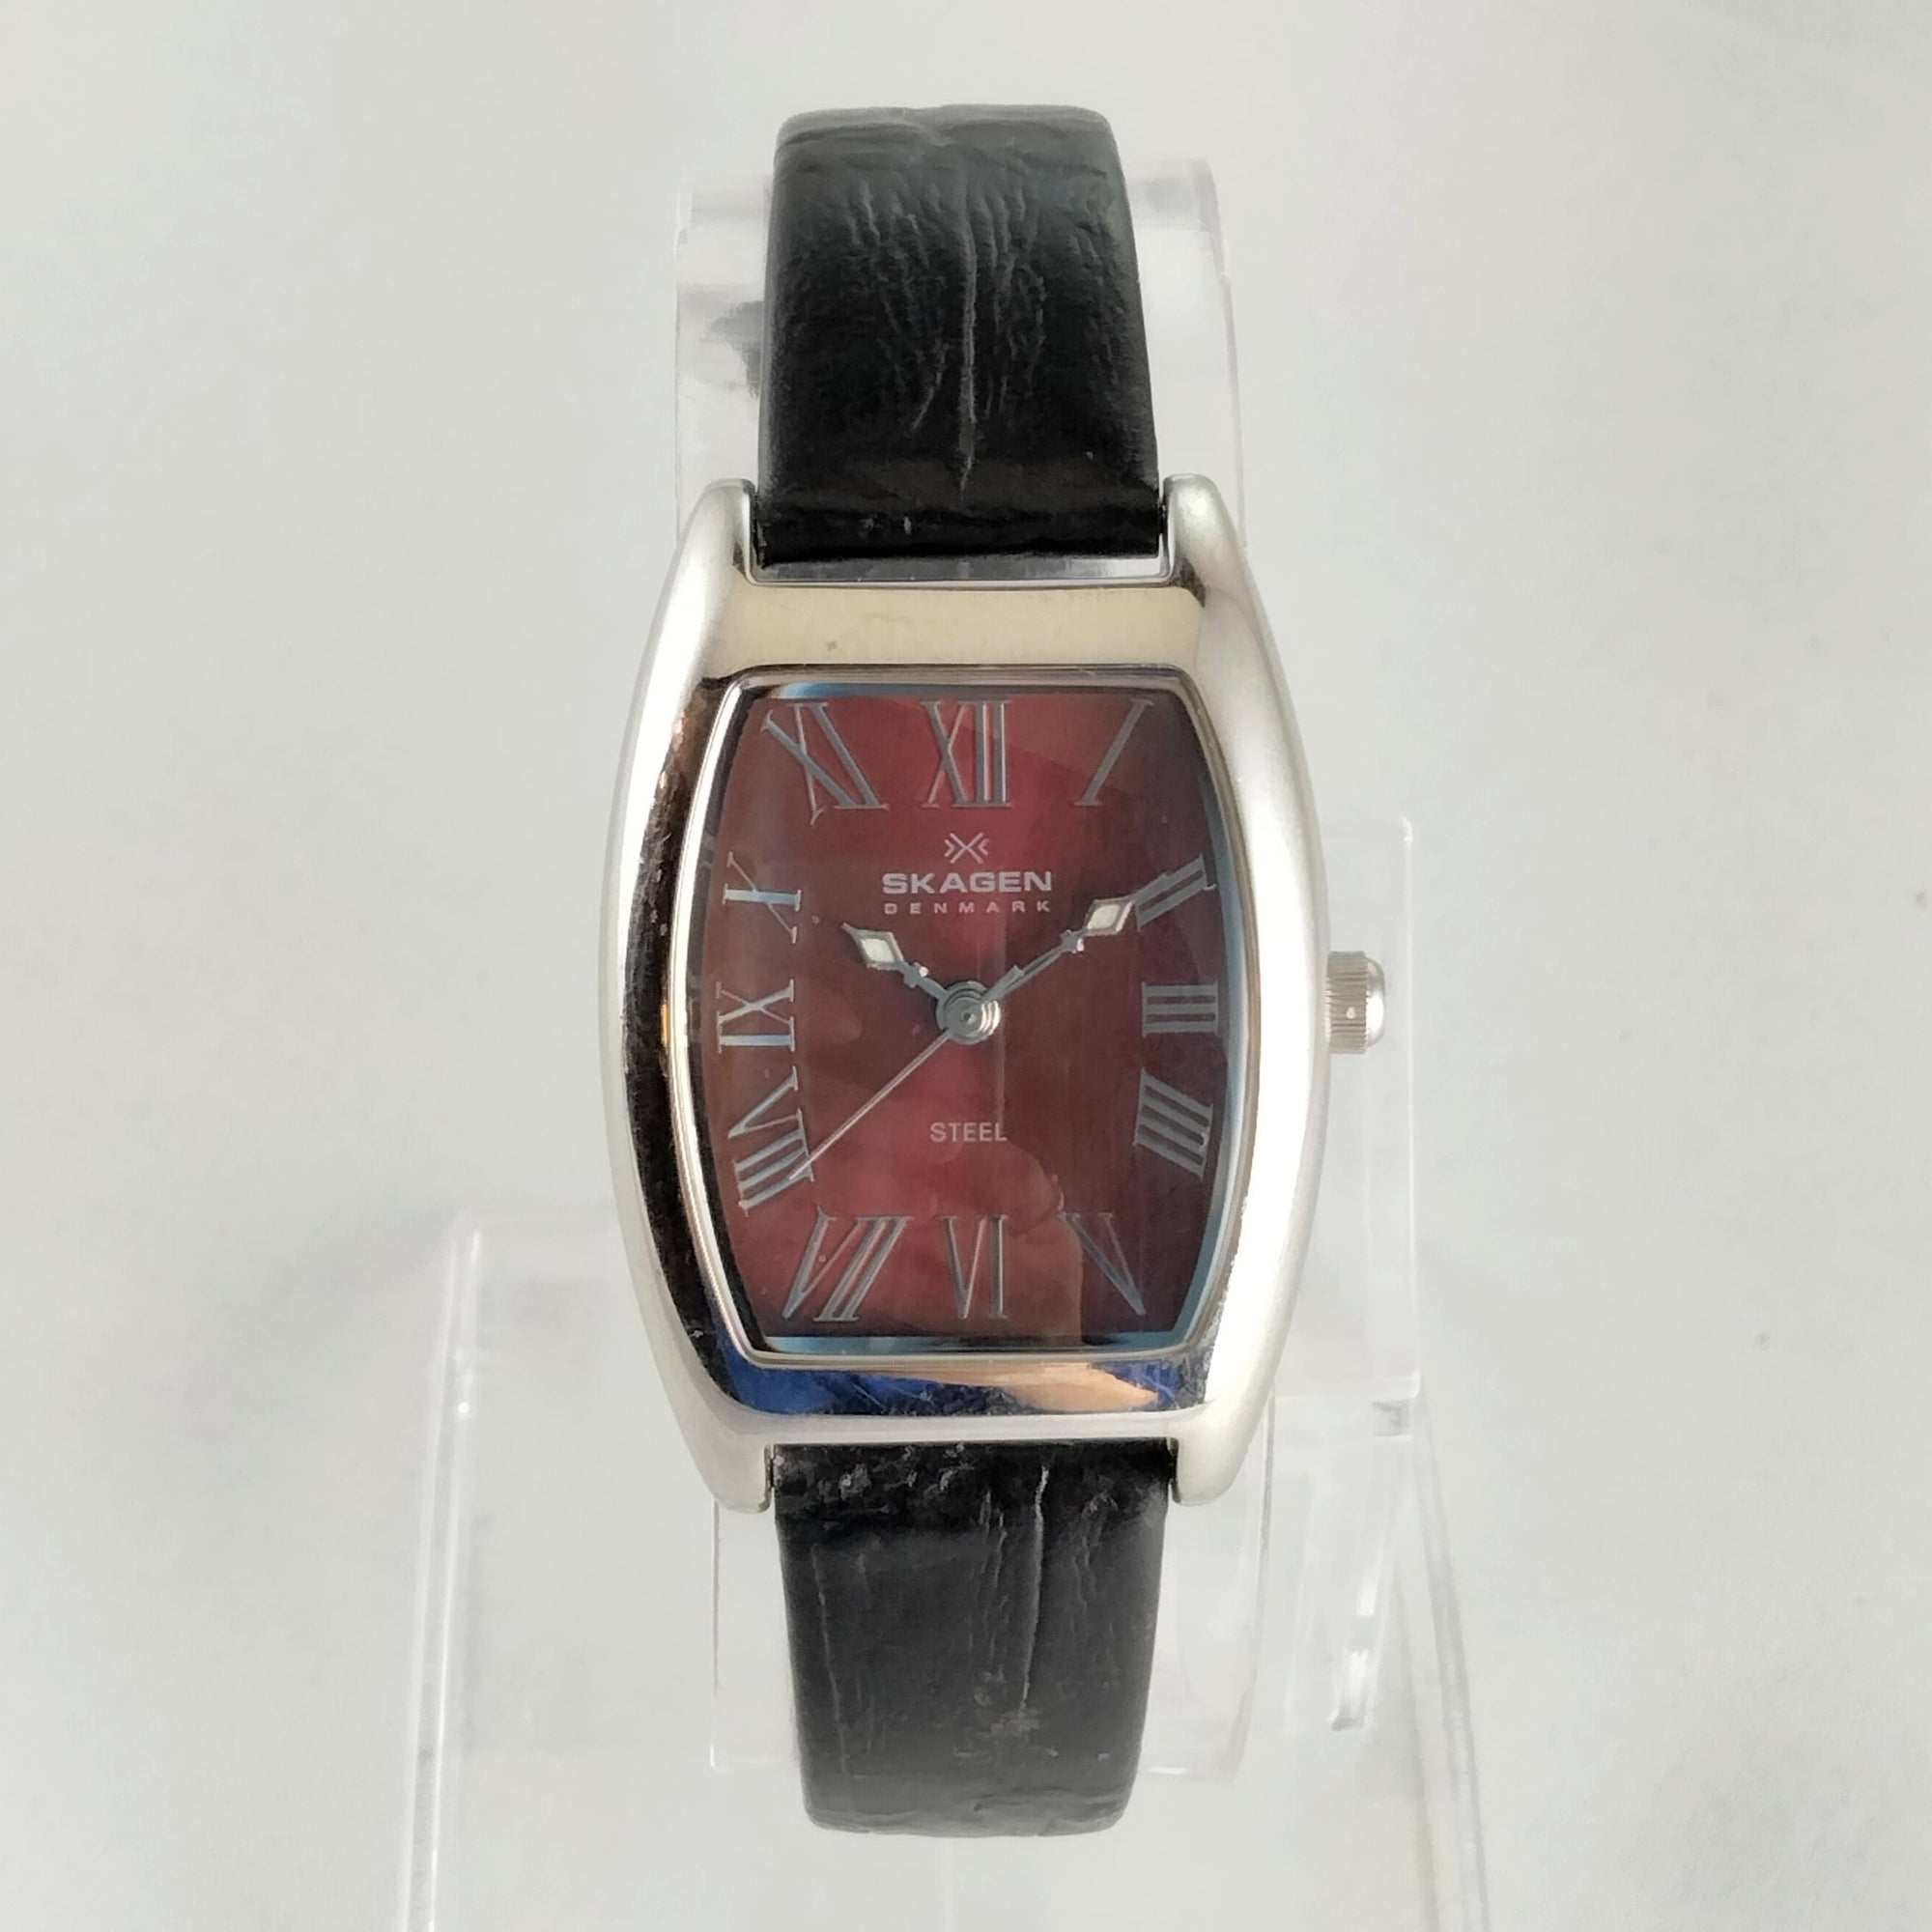 I Like Mikes Mid Century Modern Watches Skagen Women's Stainless Steel Watch, Crimson Dial, Roman Numeral Hour Markers, Leather Strap